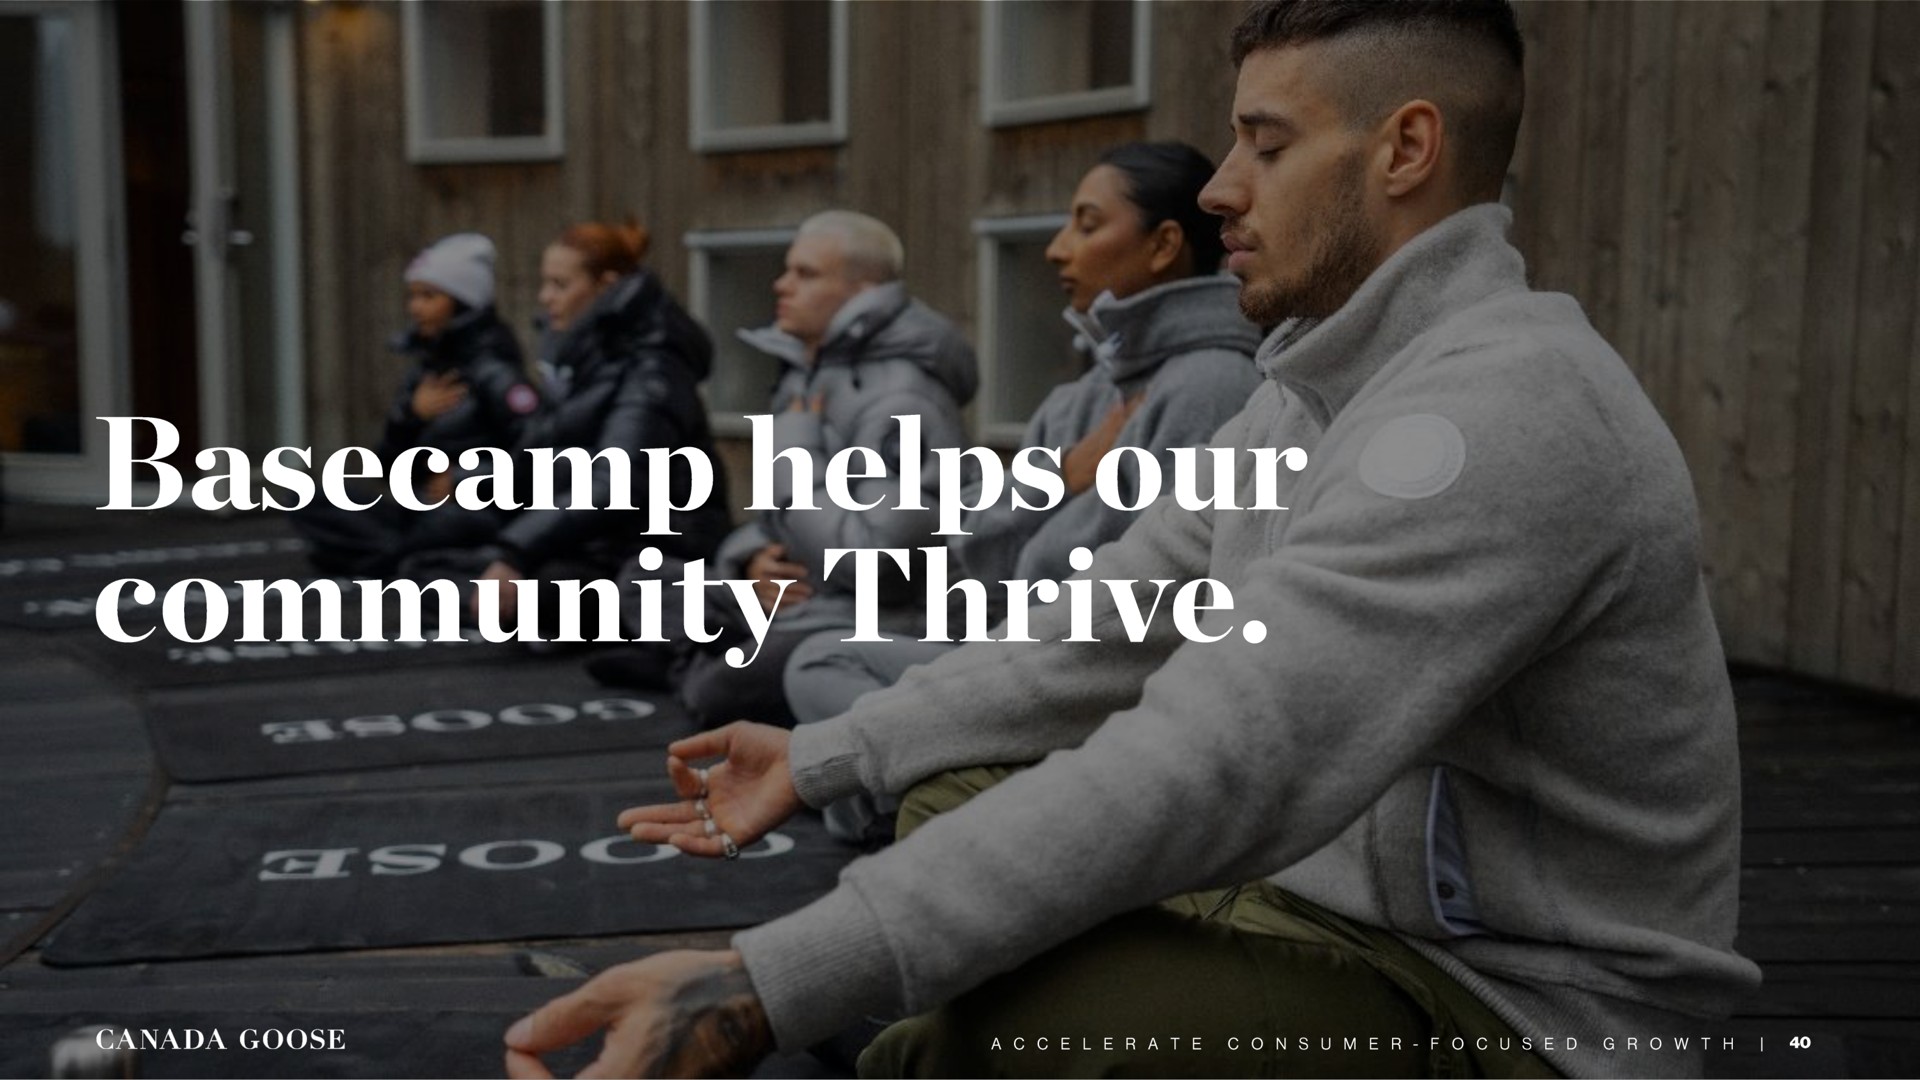 helps our community a focused growth | Canada Goose